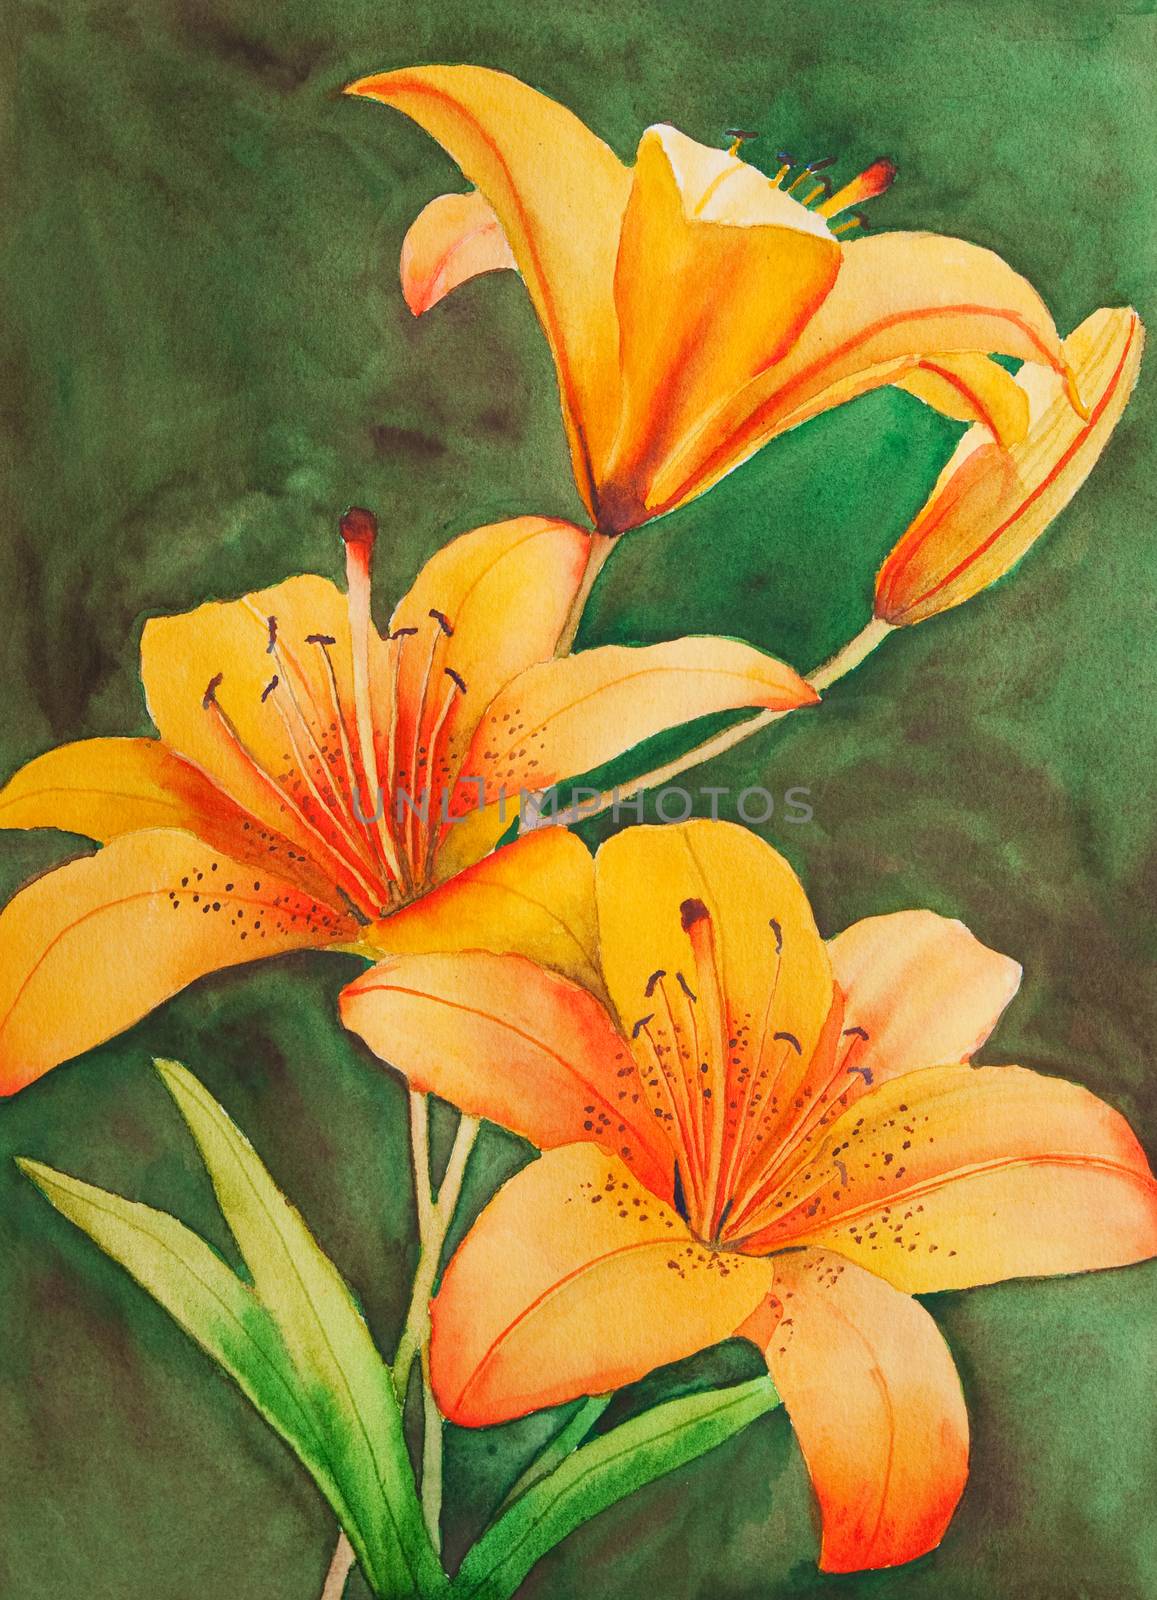 Tiger Lilies by songbird839